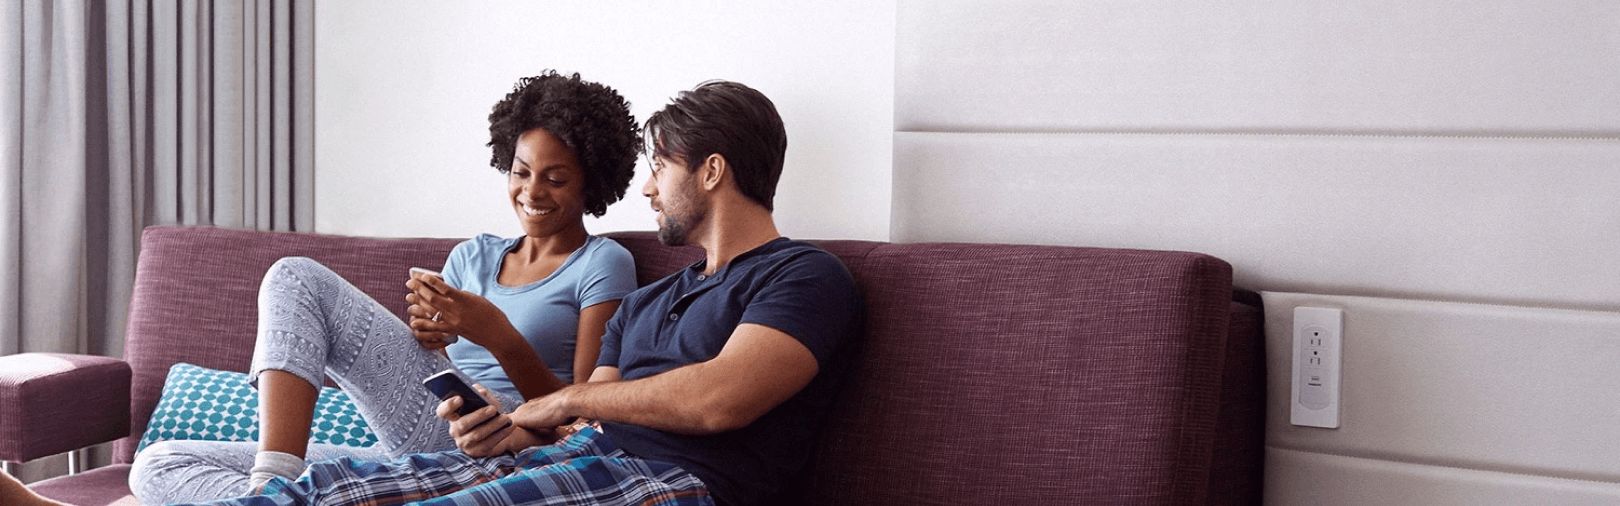 Man and woman sitting on couch in room